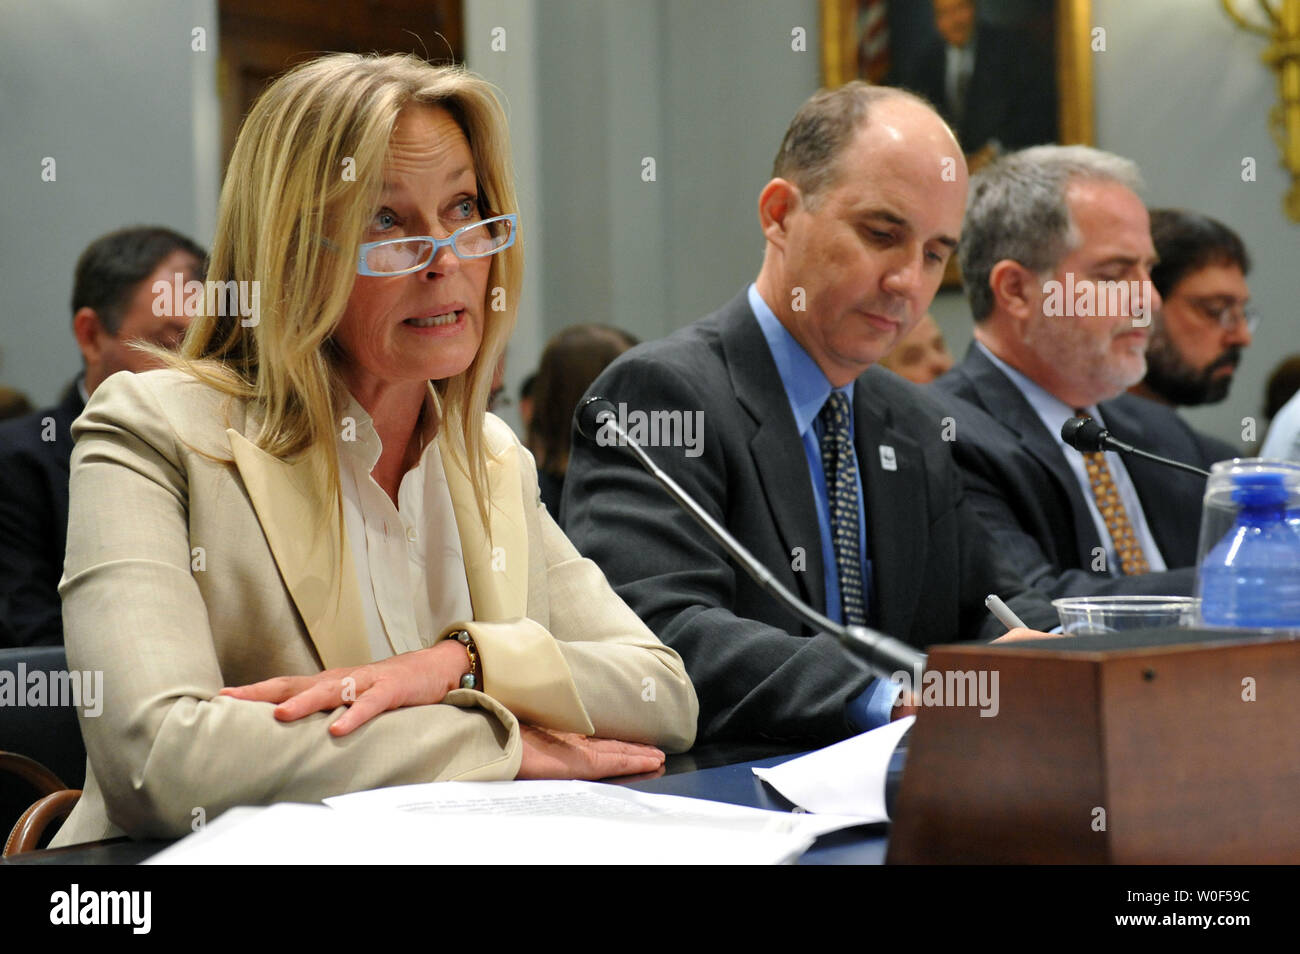 Bo Derek (L), actress and board member of WildAid testifies during a House Natural Resources Insular Affairs, Oceans and Wildlife Subcommittee hearing on H.R.3086, the 'Global Wildlife Conservation, Coordination, and Enhancement Act of 2009' in Washington on July 28, 2009. Derek was joined by Carter Roberts (C), president and CEO of  the World Wildlife Fund and Steven Monfort, acting director of the Smithsonian National Zoological Park. (UPI Photo/Kevin Dietsch) Stock Photo